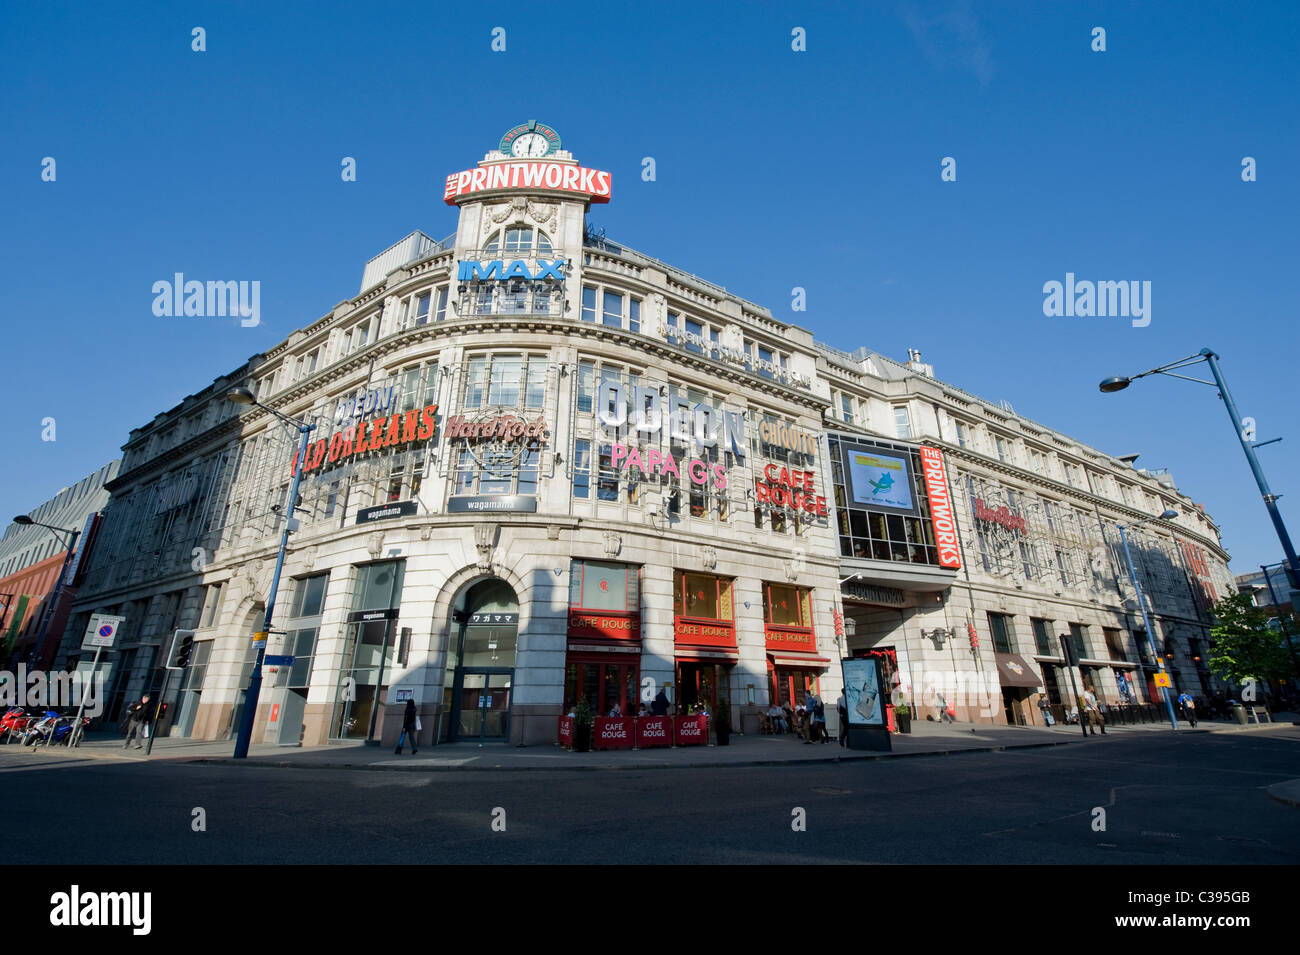 The Printworks Manchester. Stock Photo